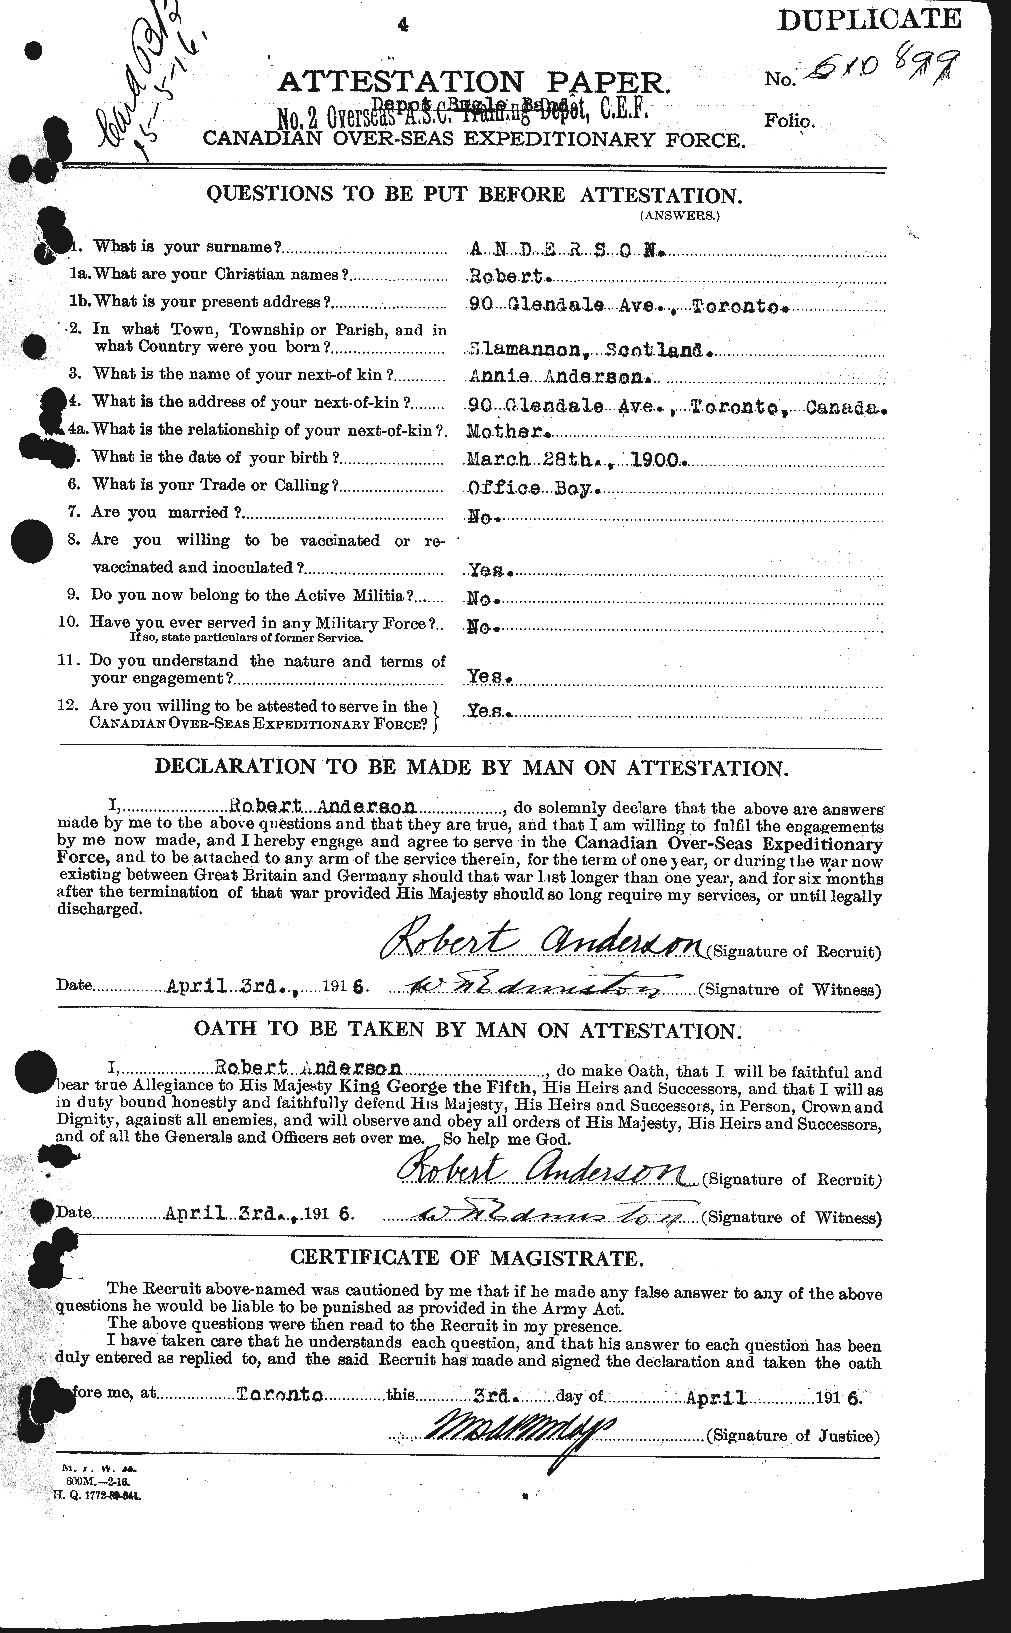 Personnel Records of the First World War - CEF 207274a